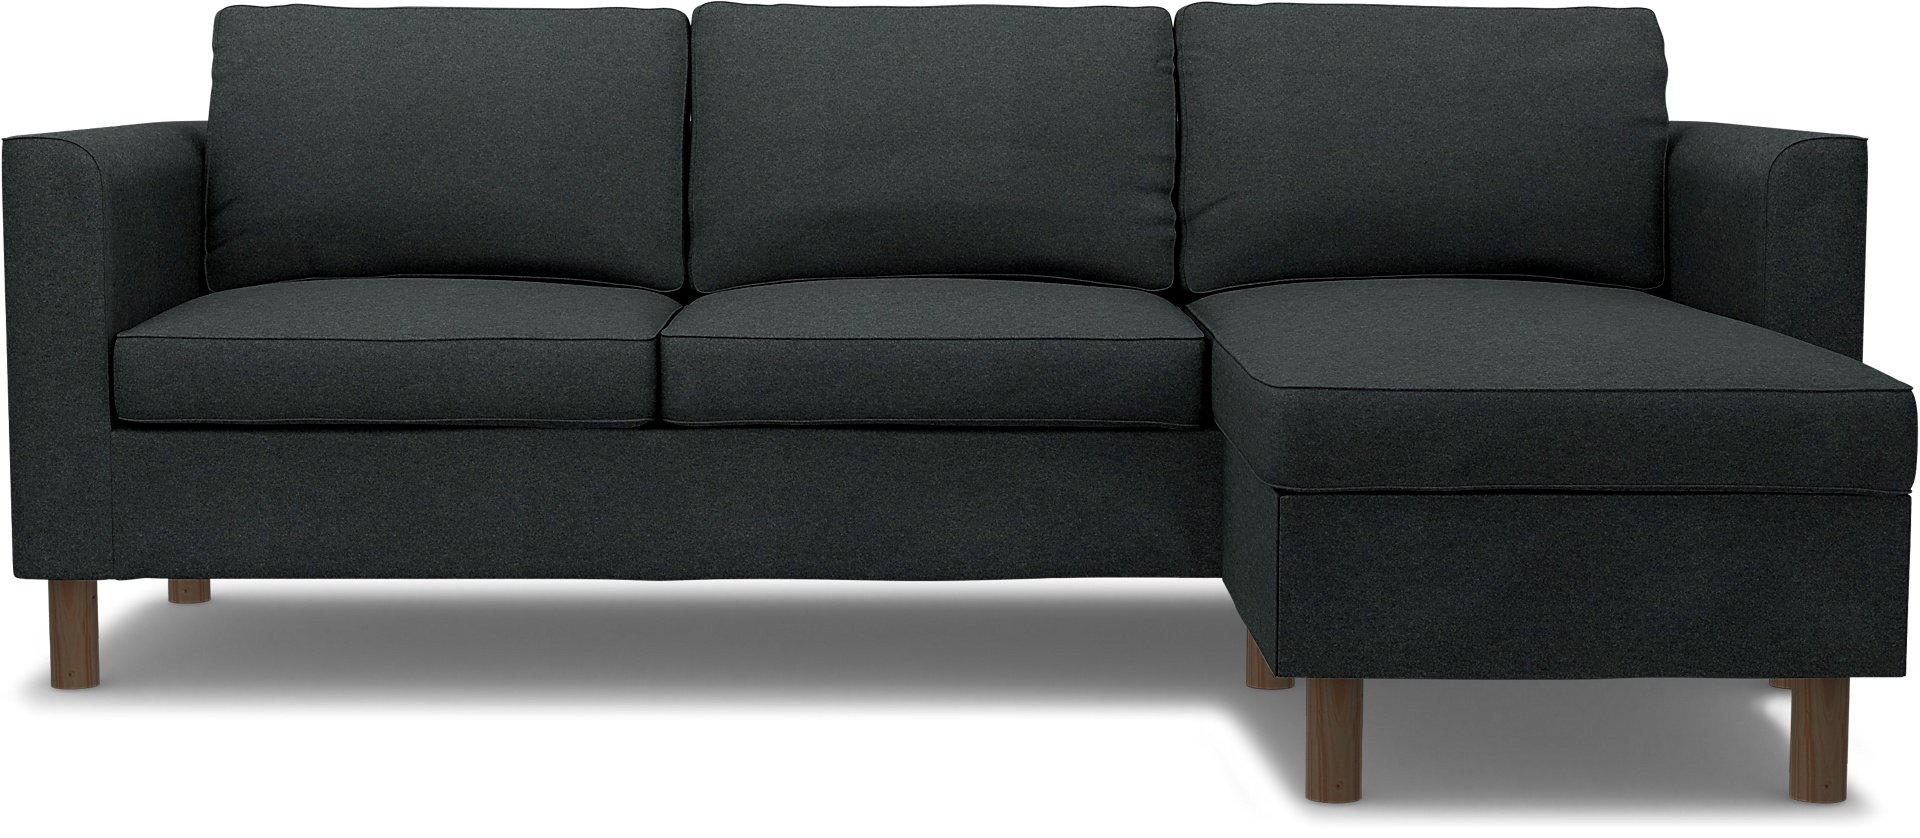 IKEA - Parup 3 Seater with chaise longue, Stone, Wool - Bemz